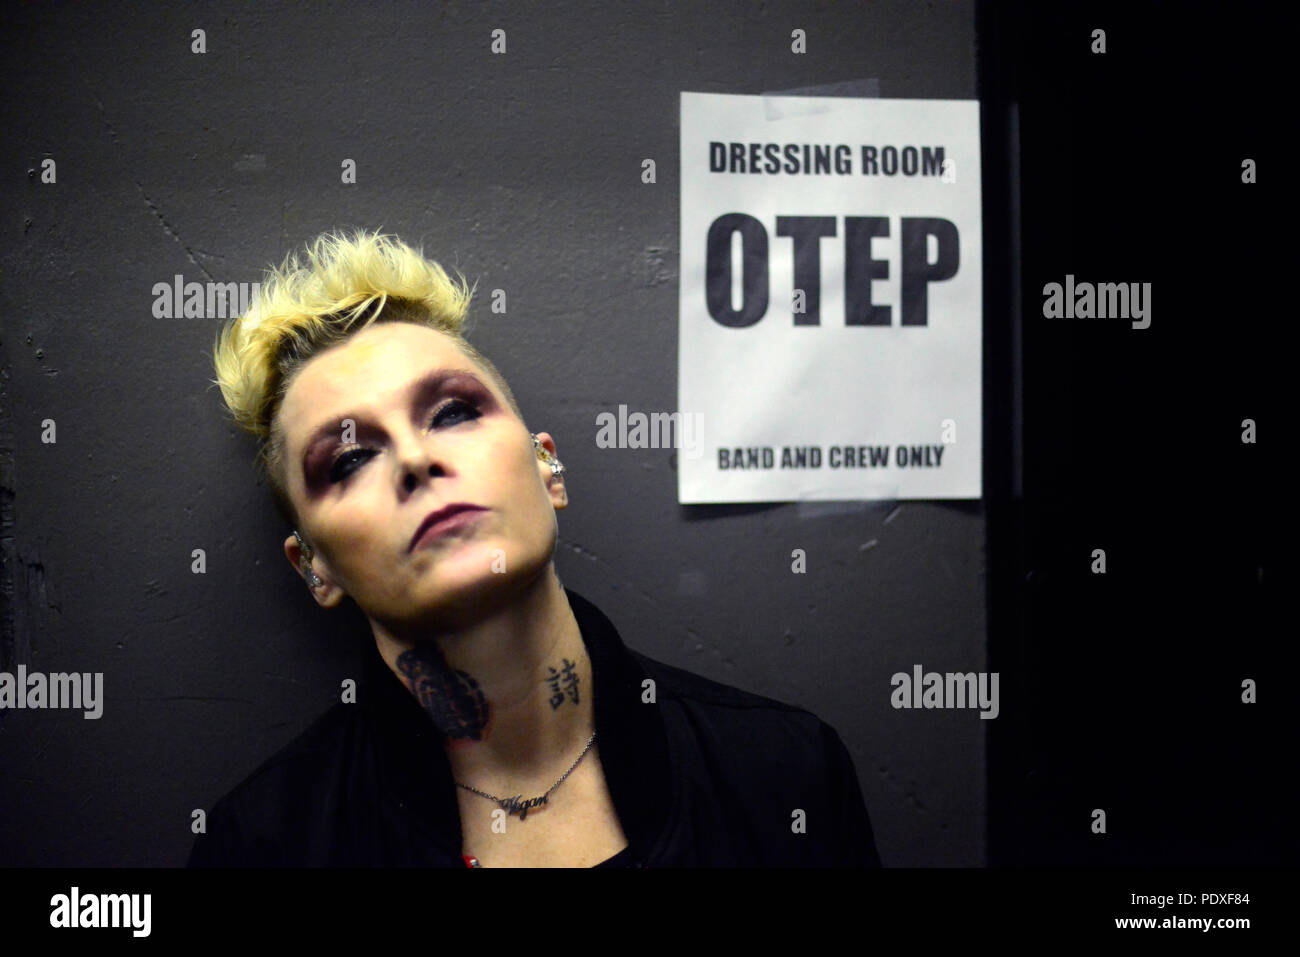 West Hollywood, CA, USA. 8th Aug, 2018. Musician - at The Whisky A Go Go, West Hollywood, California, USA, August 8, 2018. OTEP is a Los Angeles based heavy metal band that integrates rap metal, new metal, alternative metal into their sound. OTEP is an anagram for poet. Otep Shamaya descibes the bands sound as, ''art house nu-metal.'' .Image Credit cr Scott Mitchell/ZUMA Press Credit: Scott Mitchell/ZUMA Wire/Alamy Live News Stock Photo